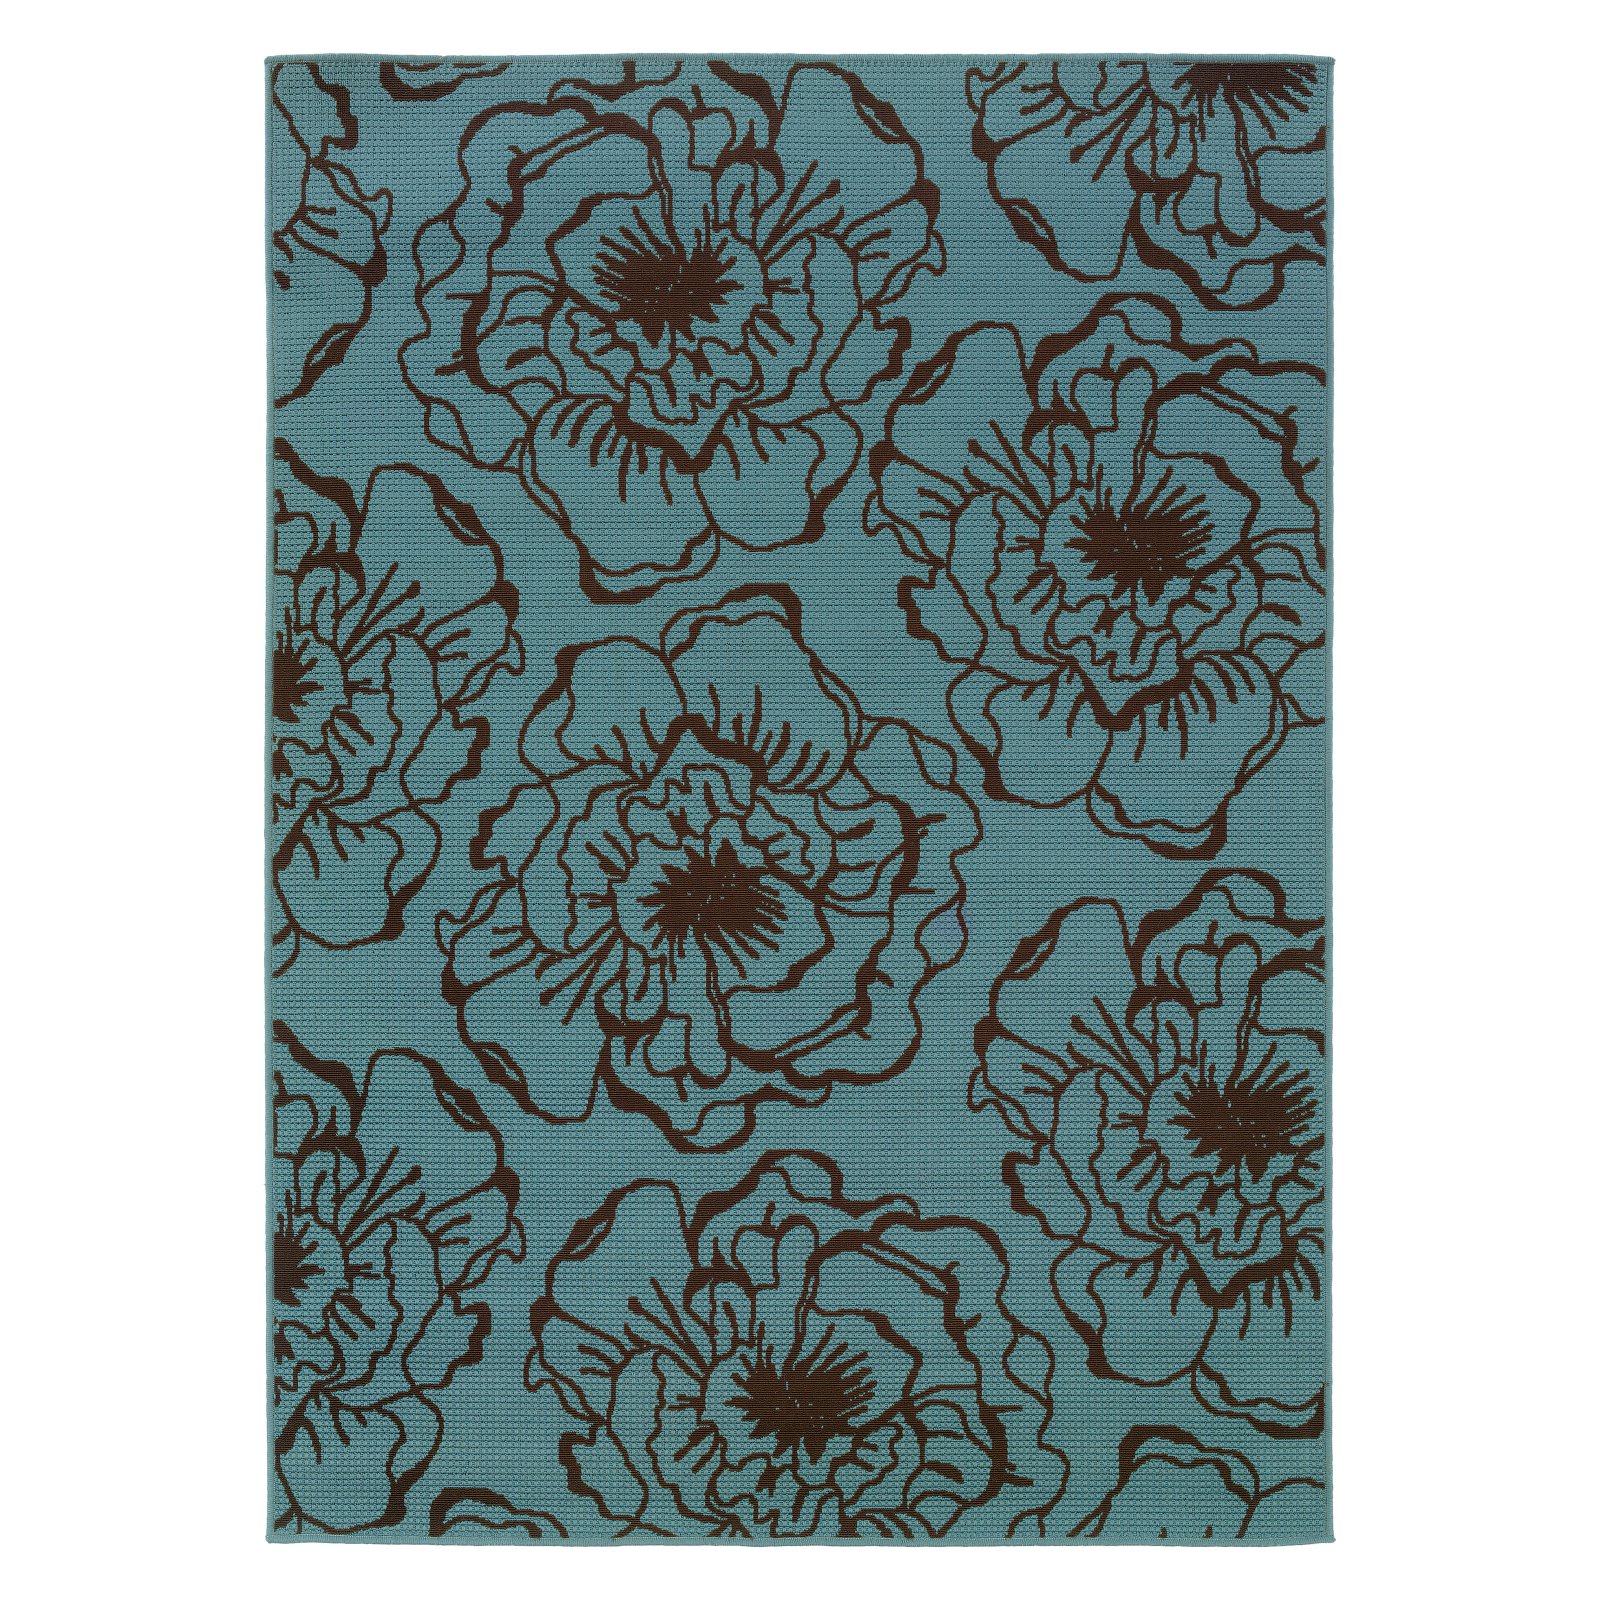 Avalon Home Cameron Overscale Floral Indoor/Outdoor Area Rug - image 2 of 2